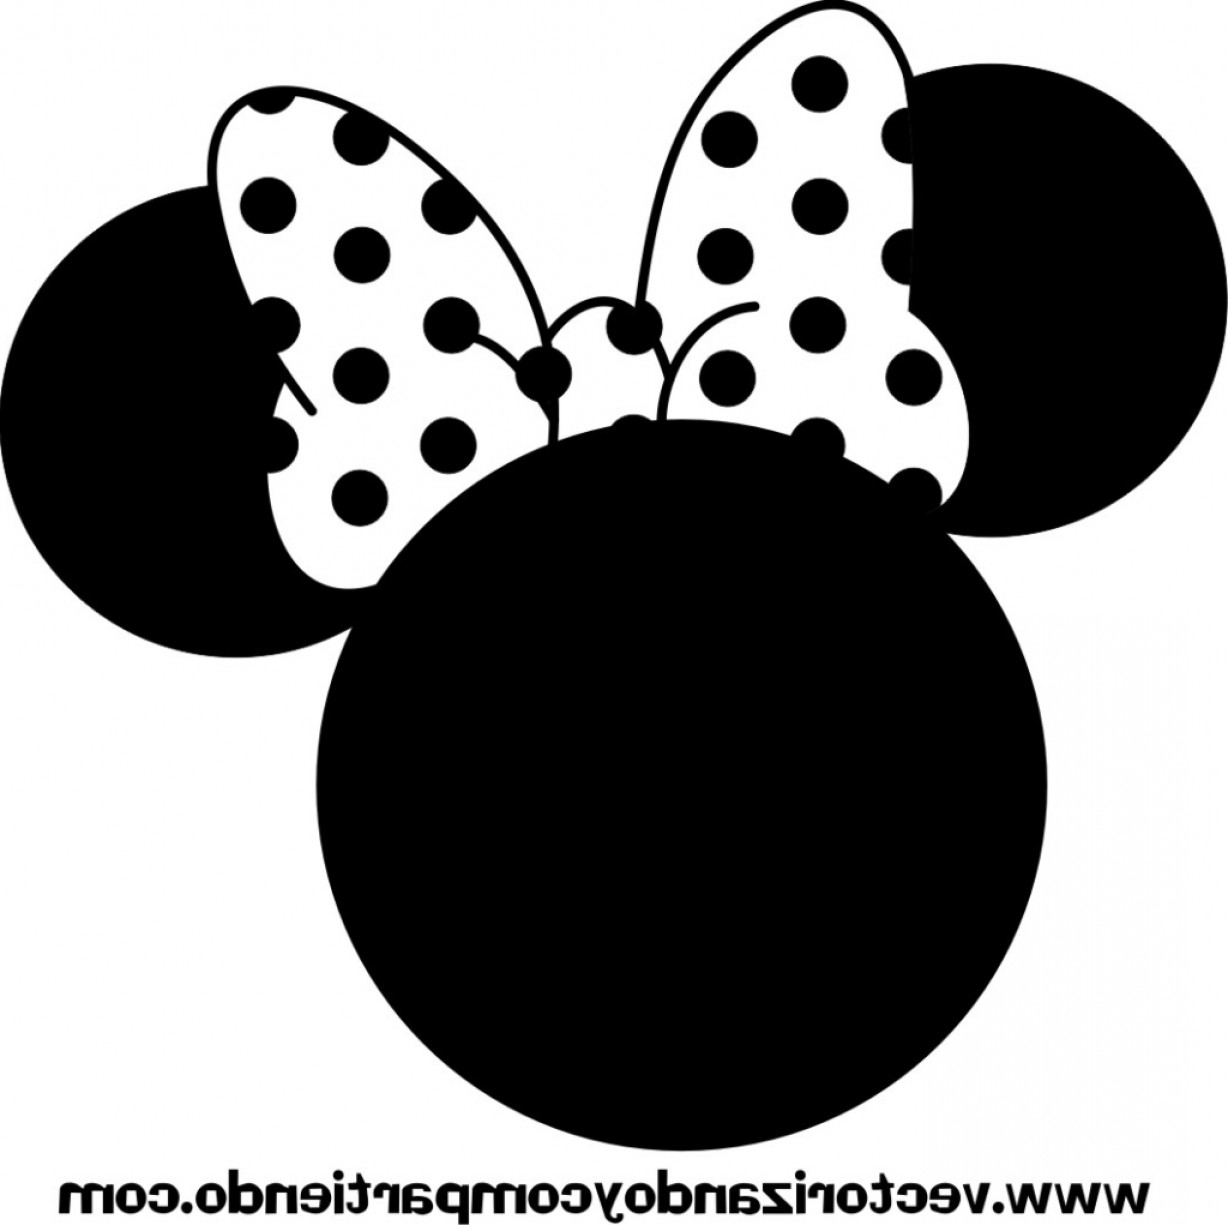 Download Mickey Silhouette Vector at Vectorified.com | Collection of Mickey Silhouette Vector free for ...